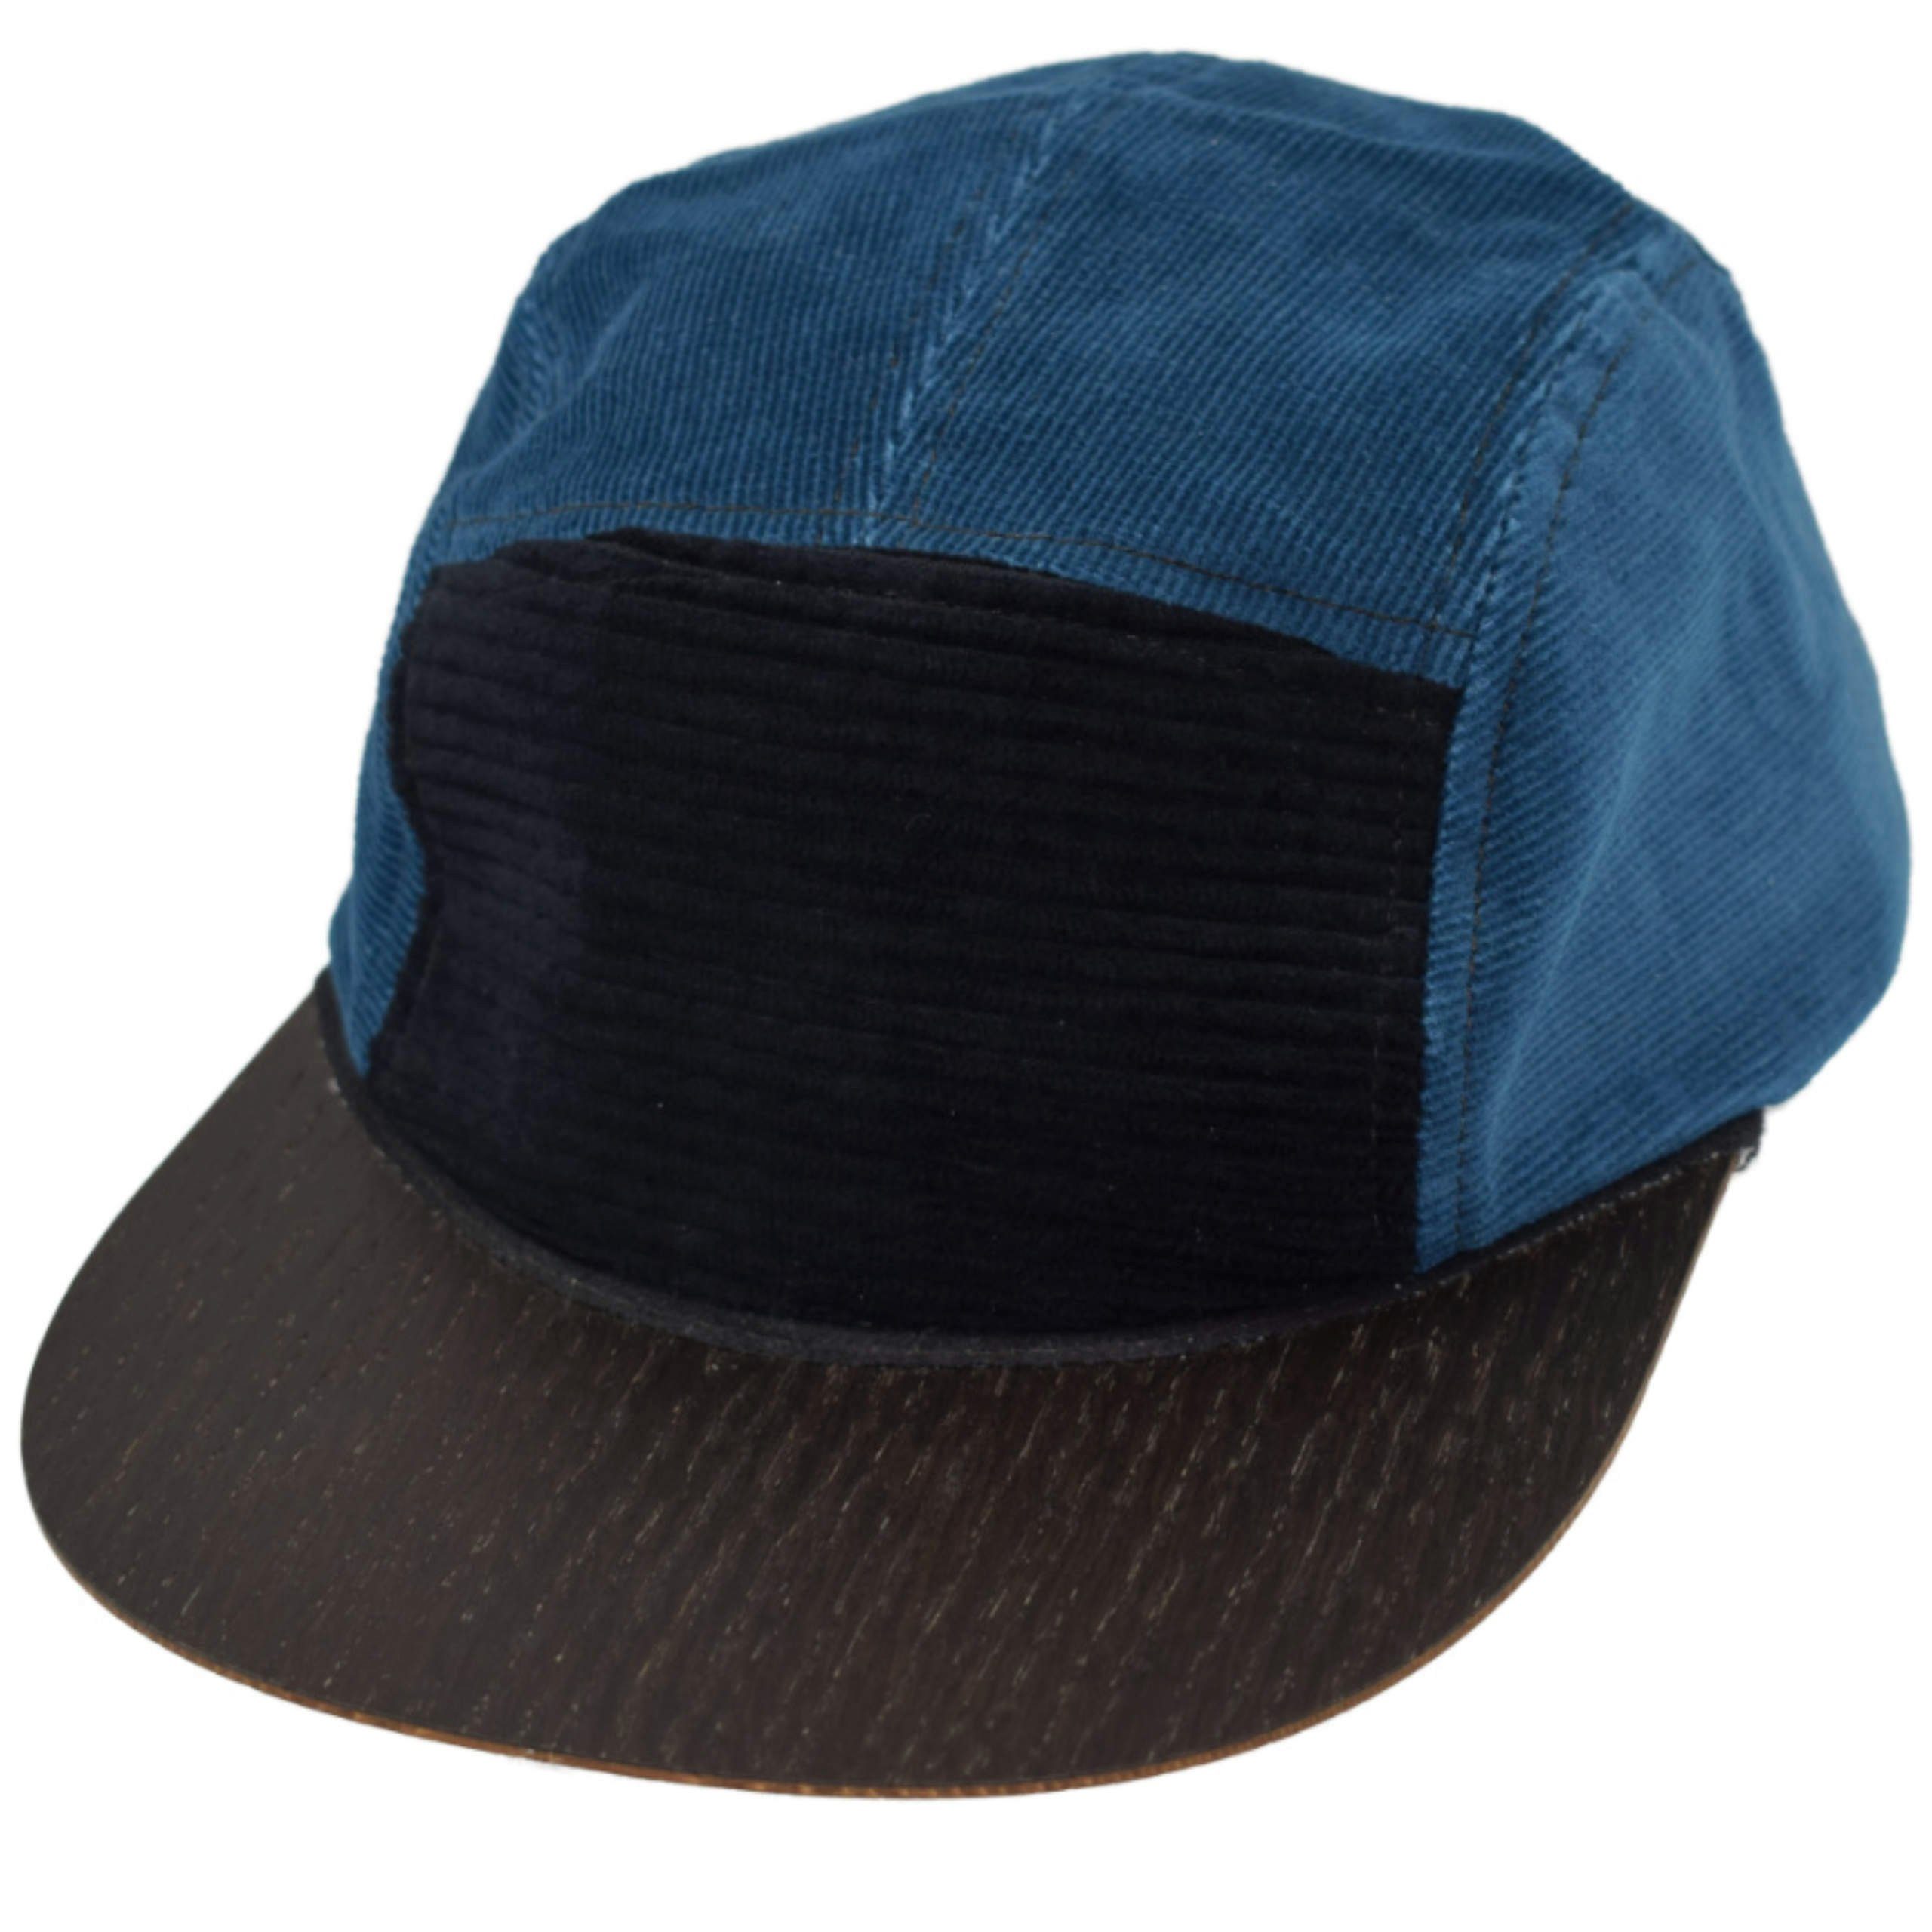 Lou-i Snapback Cap Cord Cap mit Holzschild Made in Germany Holzschild Blau